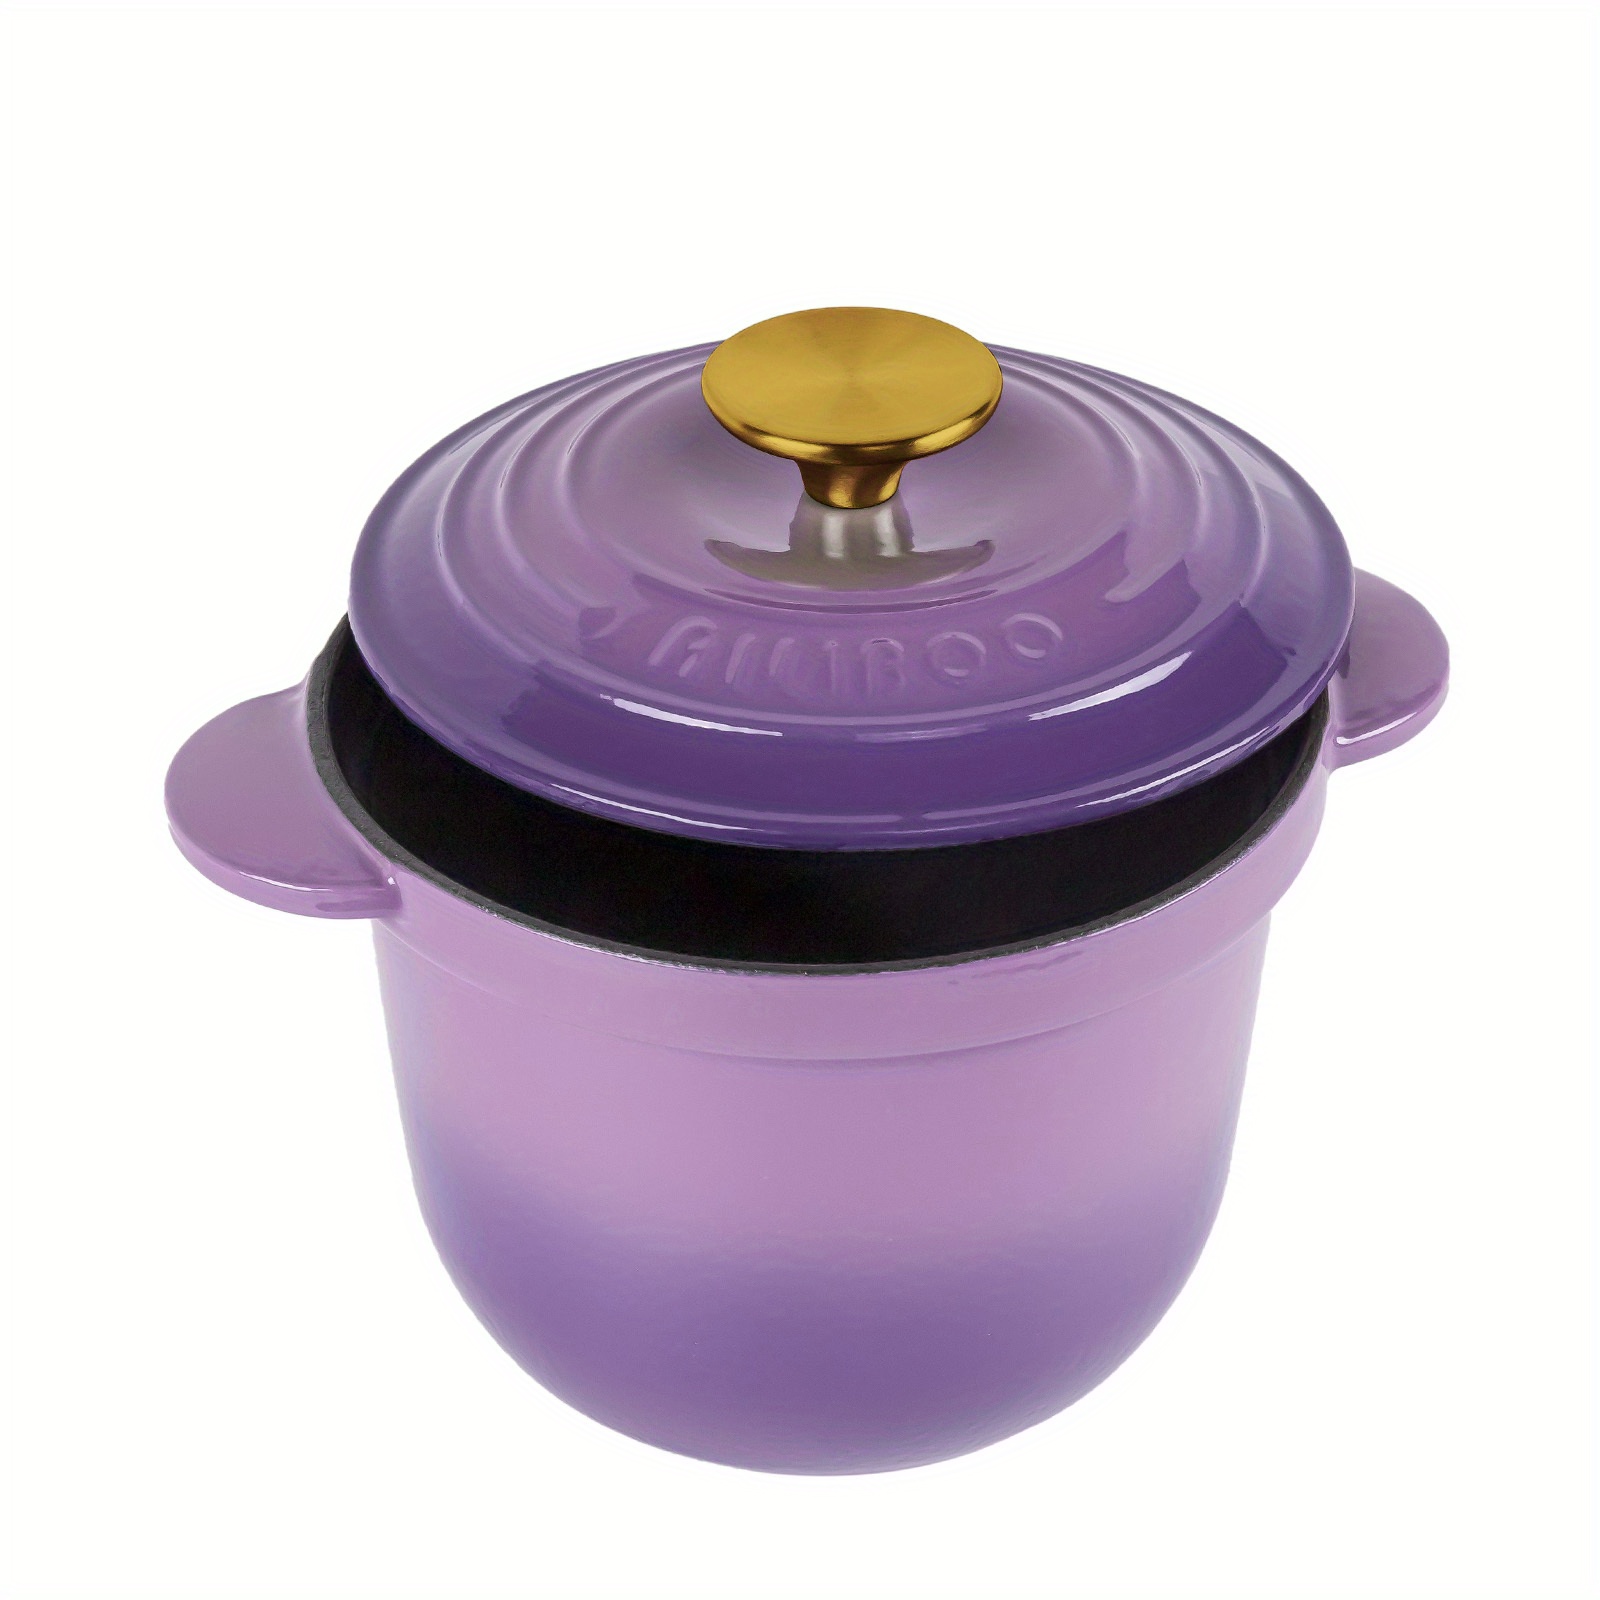 Dropship COOKWIN Enameled Cast Iron Dutch Oven With Self Basting Lid; Enamel  Coated Cookware Pot 3QT to Sell Online at a Lower Price